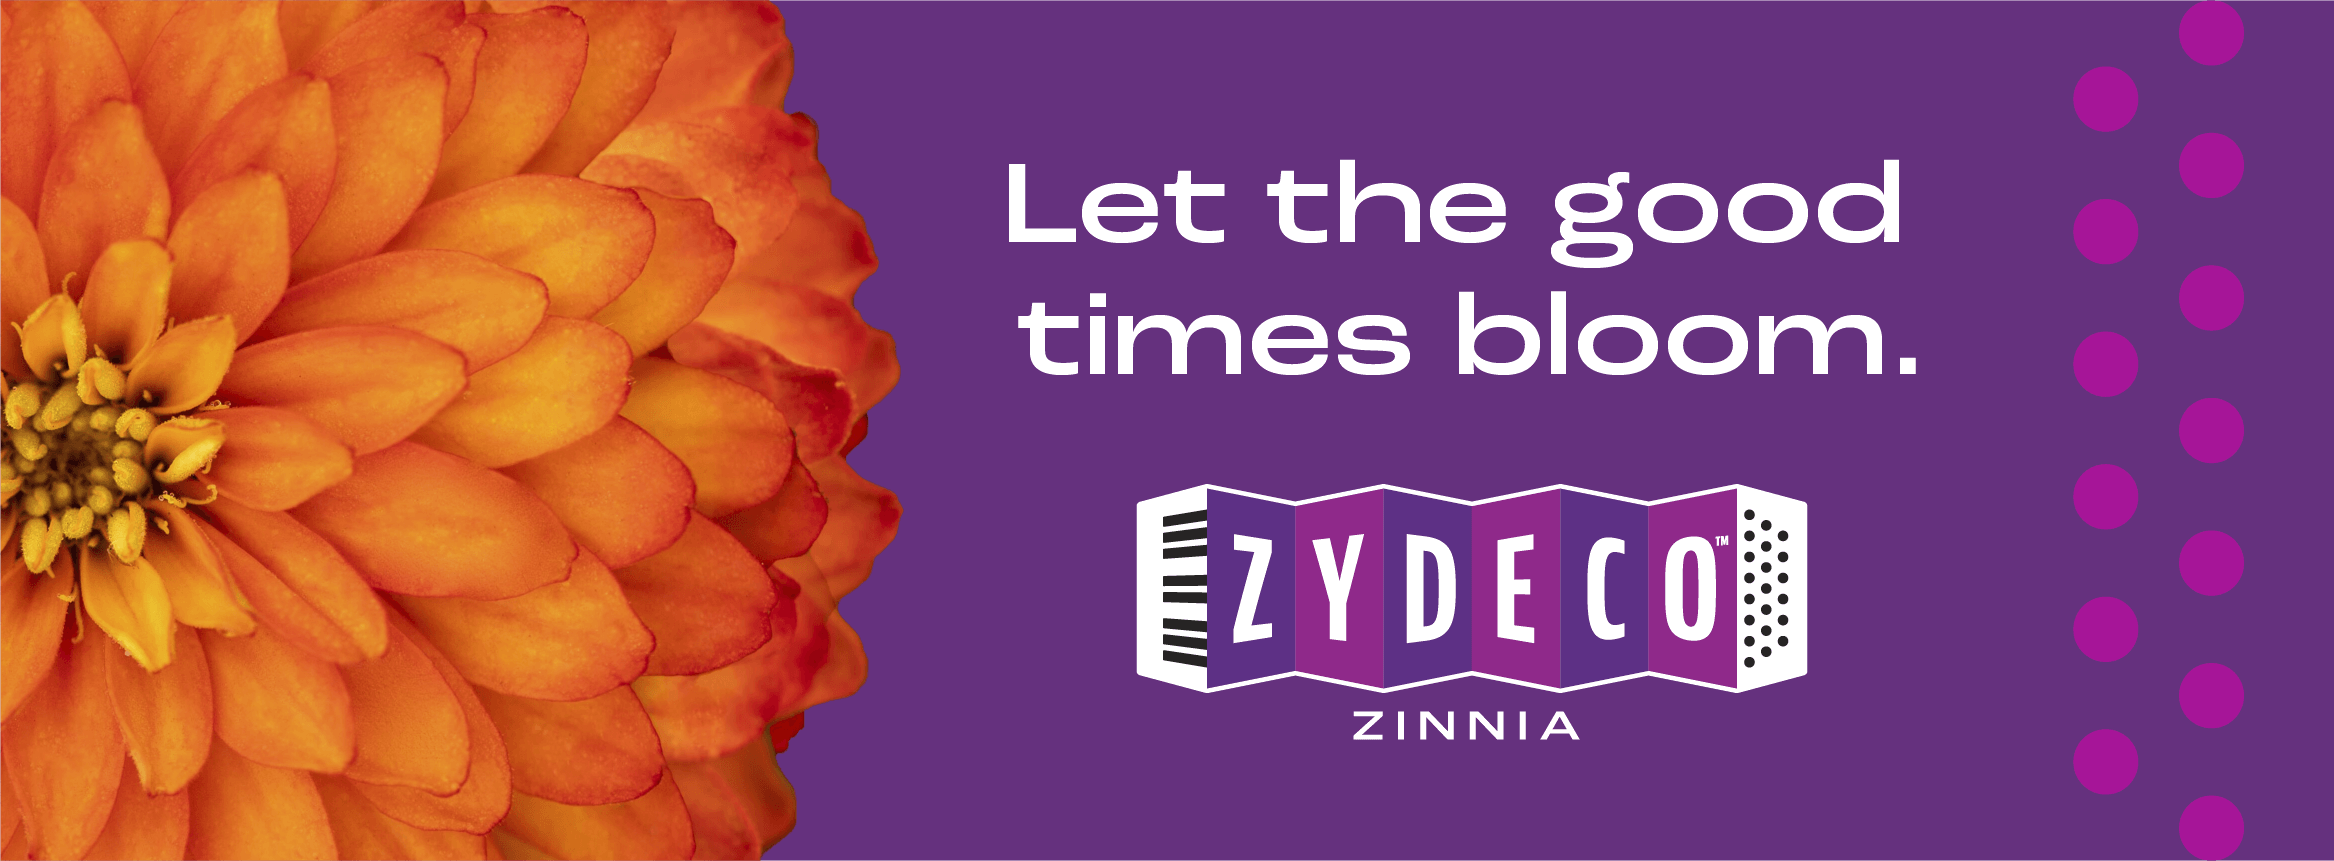 Let the Good Times Blooms with Zydeco Zinnia